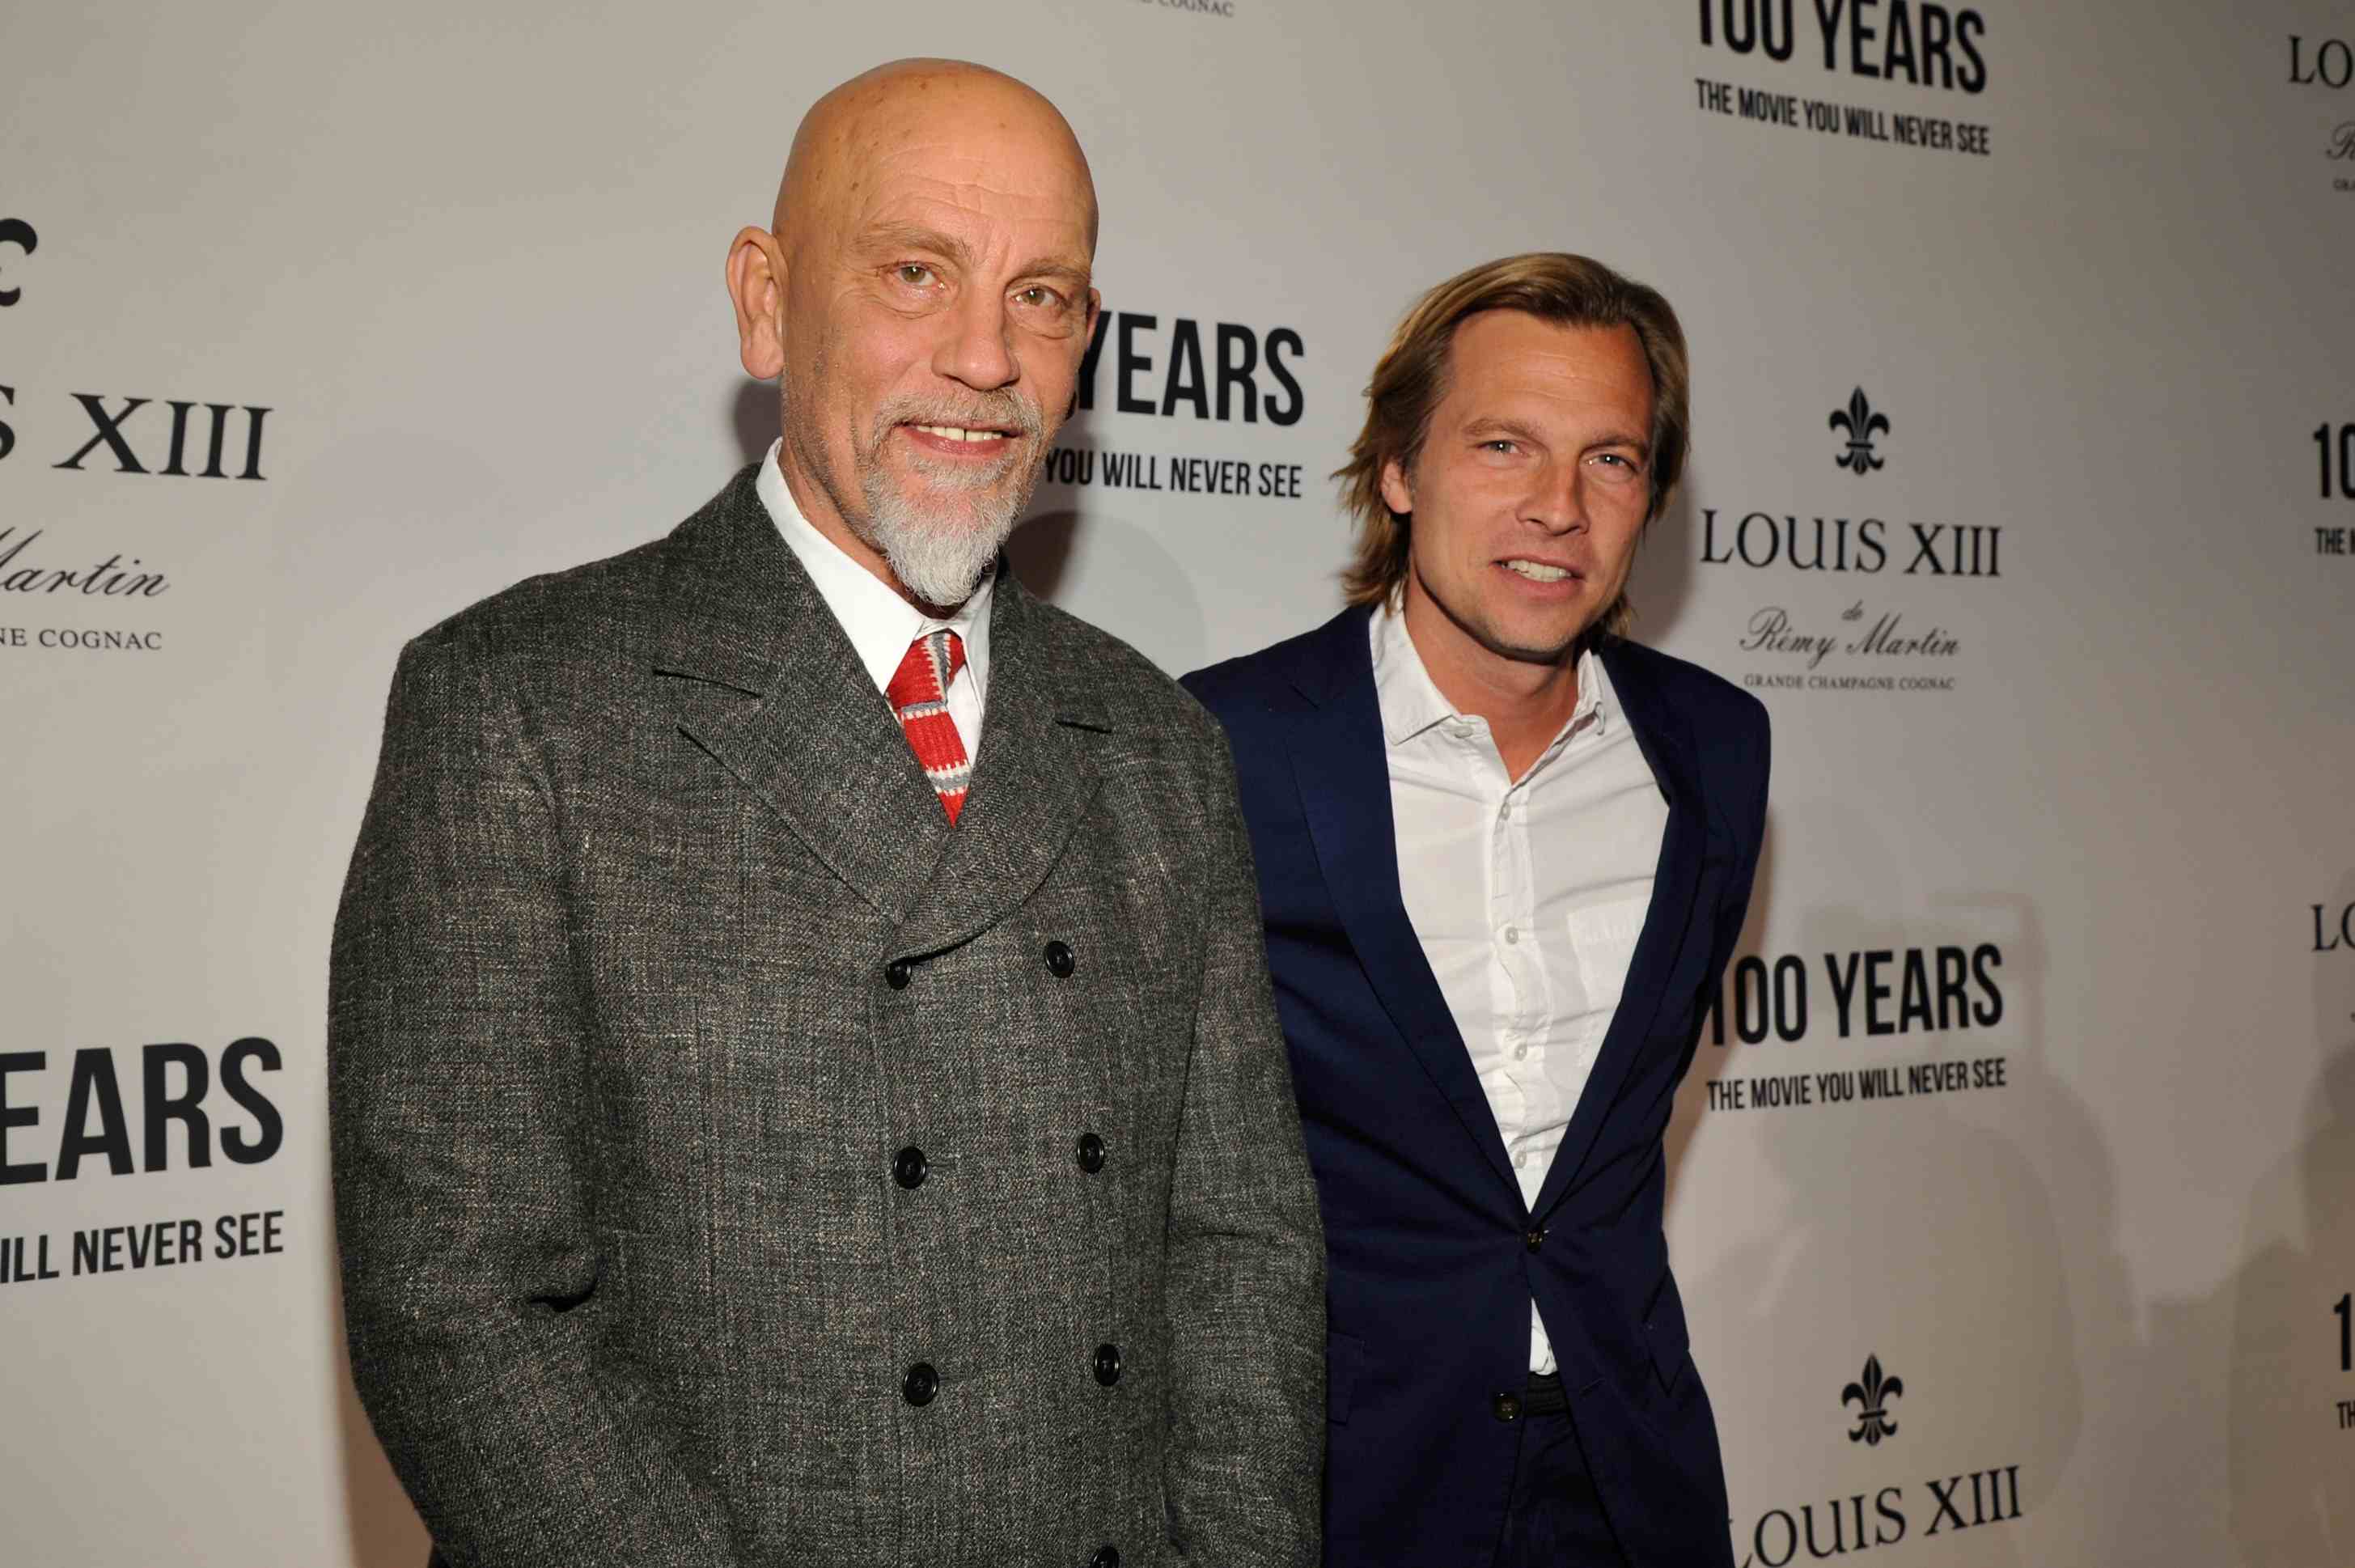 BEVERLY HILLS, CA - NOVEMBER 18: Actor John Malkovich (L) and Louis XIII Global Executive Director Ludovic du Plessis attend Louis XIII Celebration of "100 Years" The Movie You Will Never See, starring John Malkovich at a private residence on November 18, 2015 in Beverly Hills, California. (Photo by John Sciulli/Getty Images for Louis XIII)